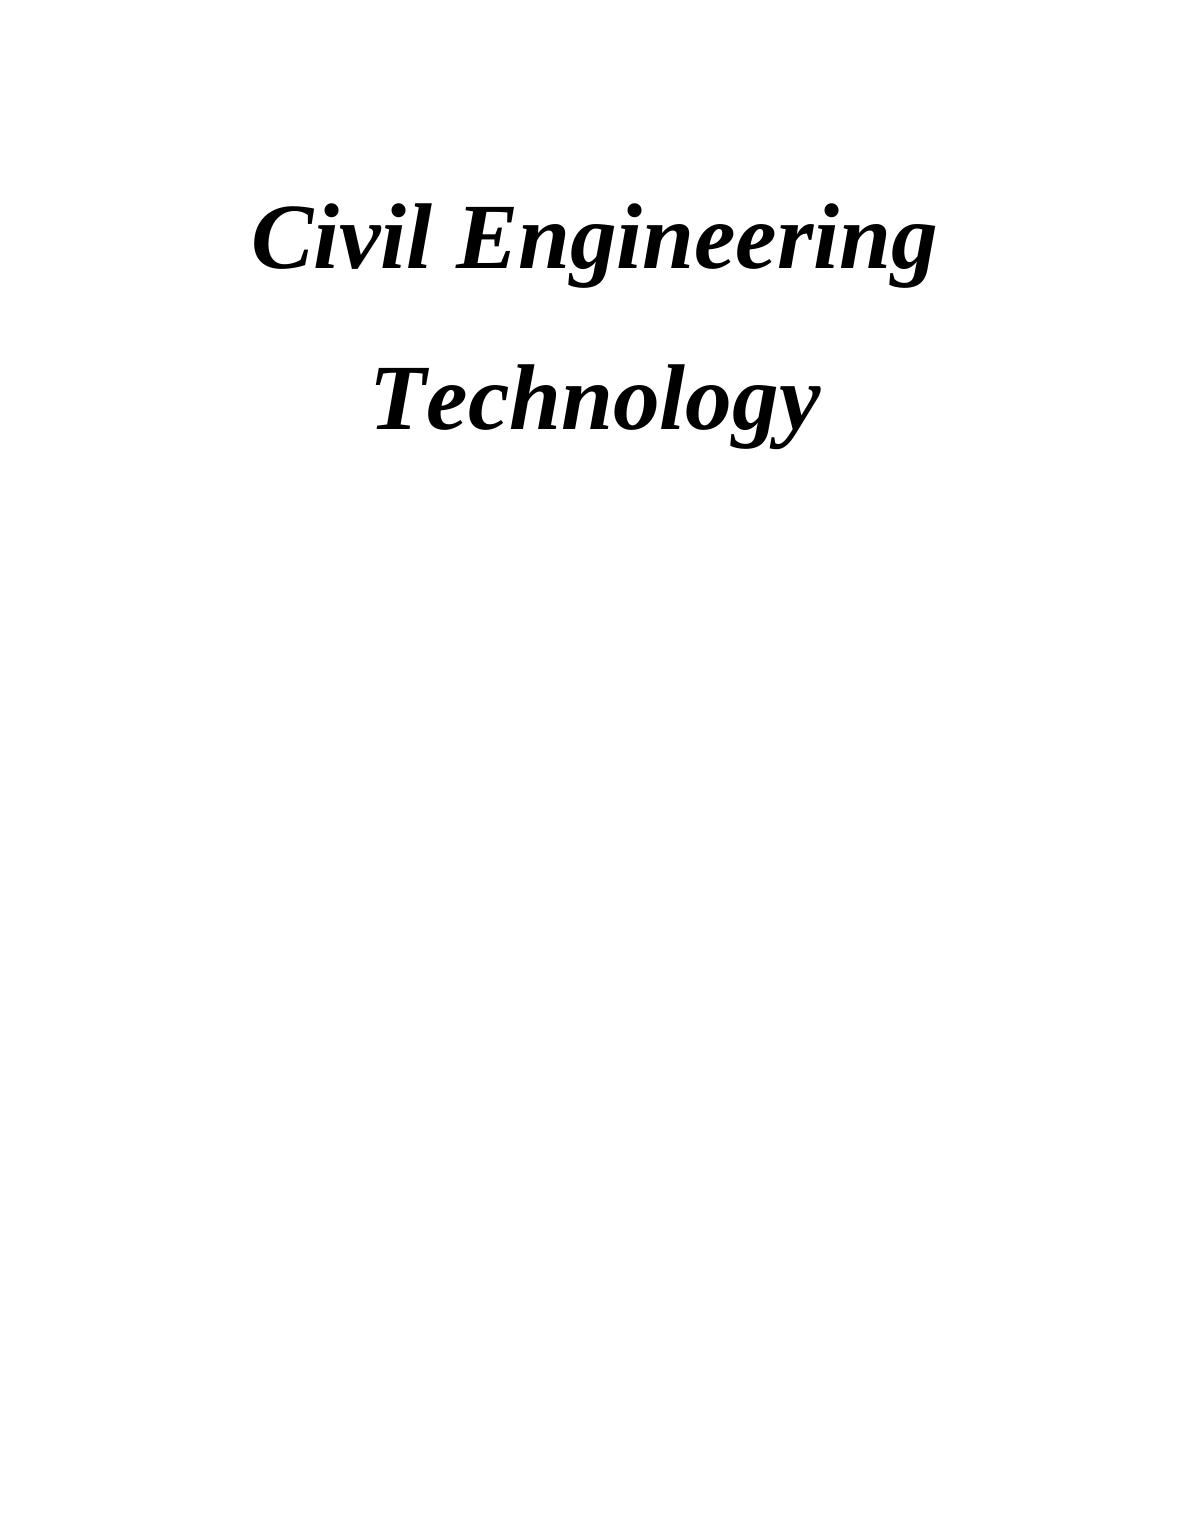 Civil Engineering Technology: Activities, Techniques, and Equipment_1